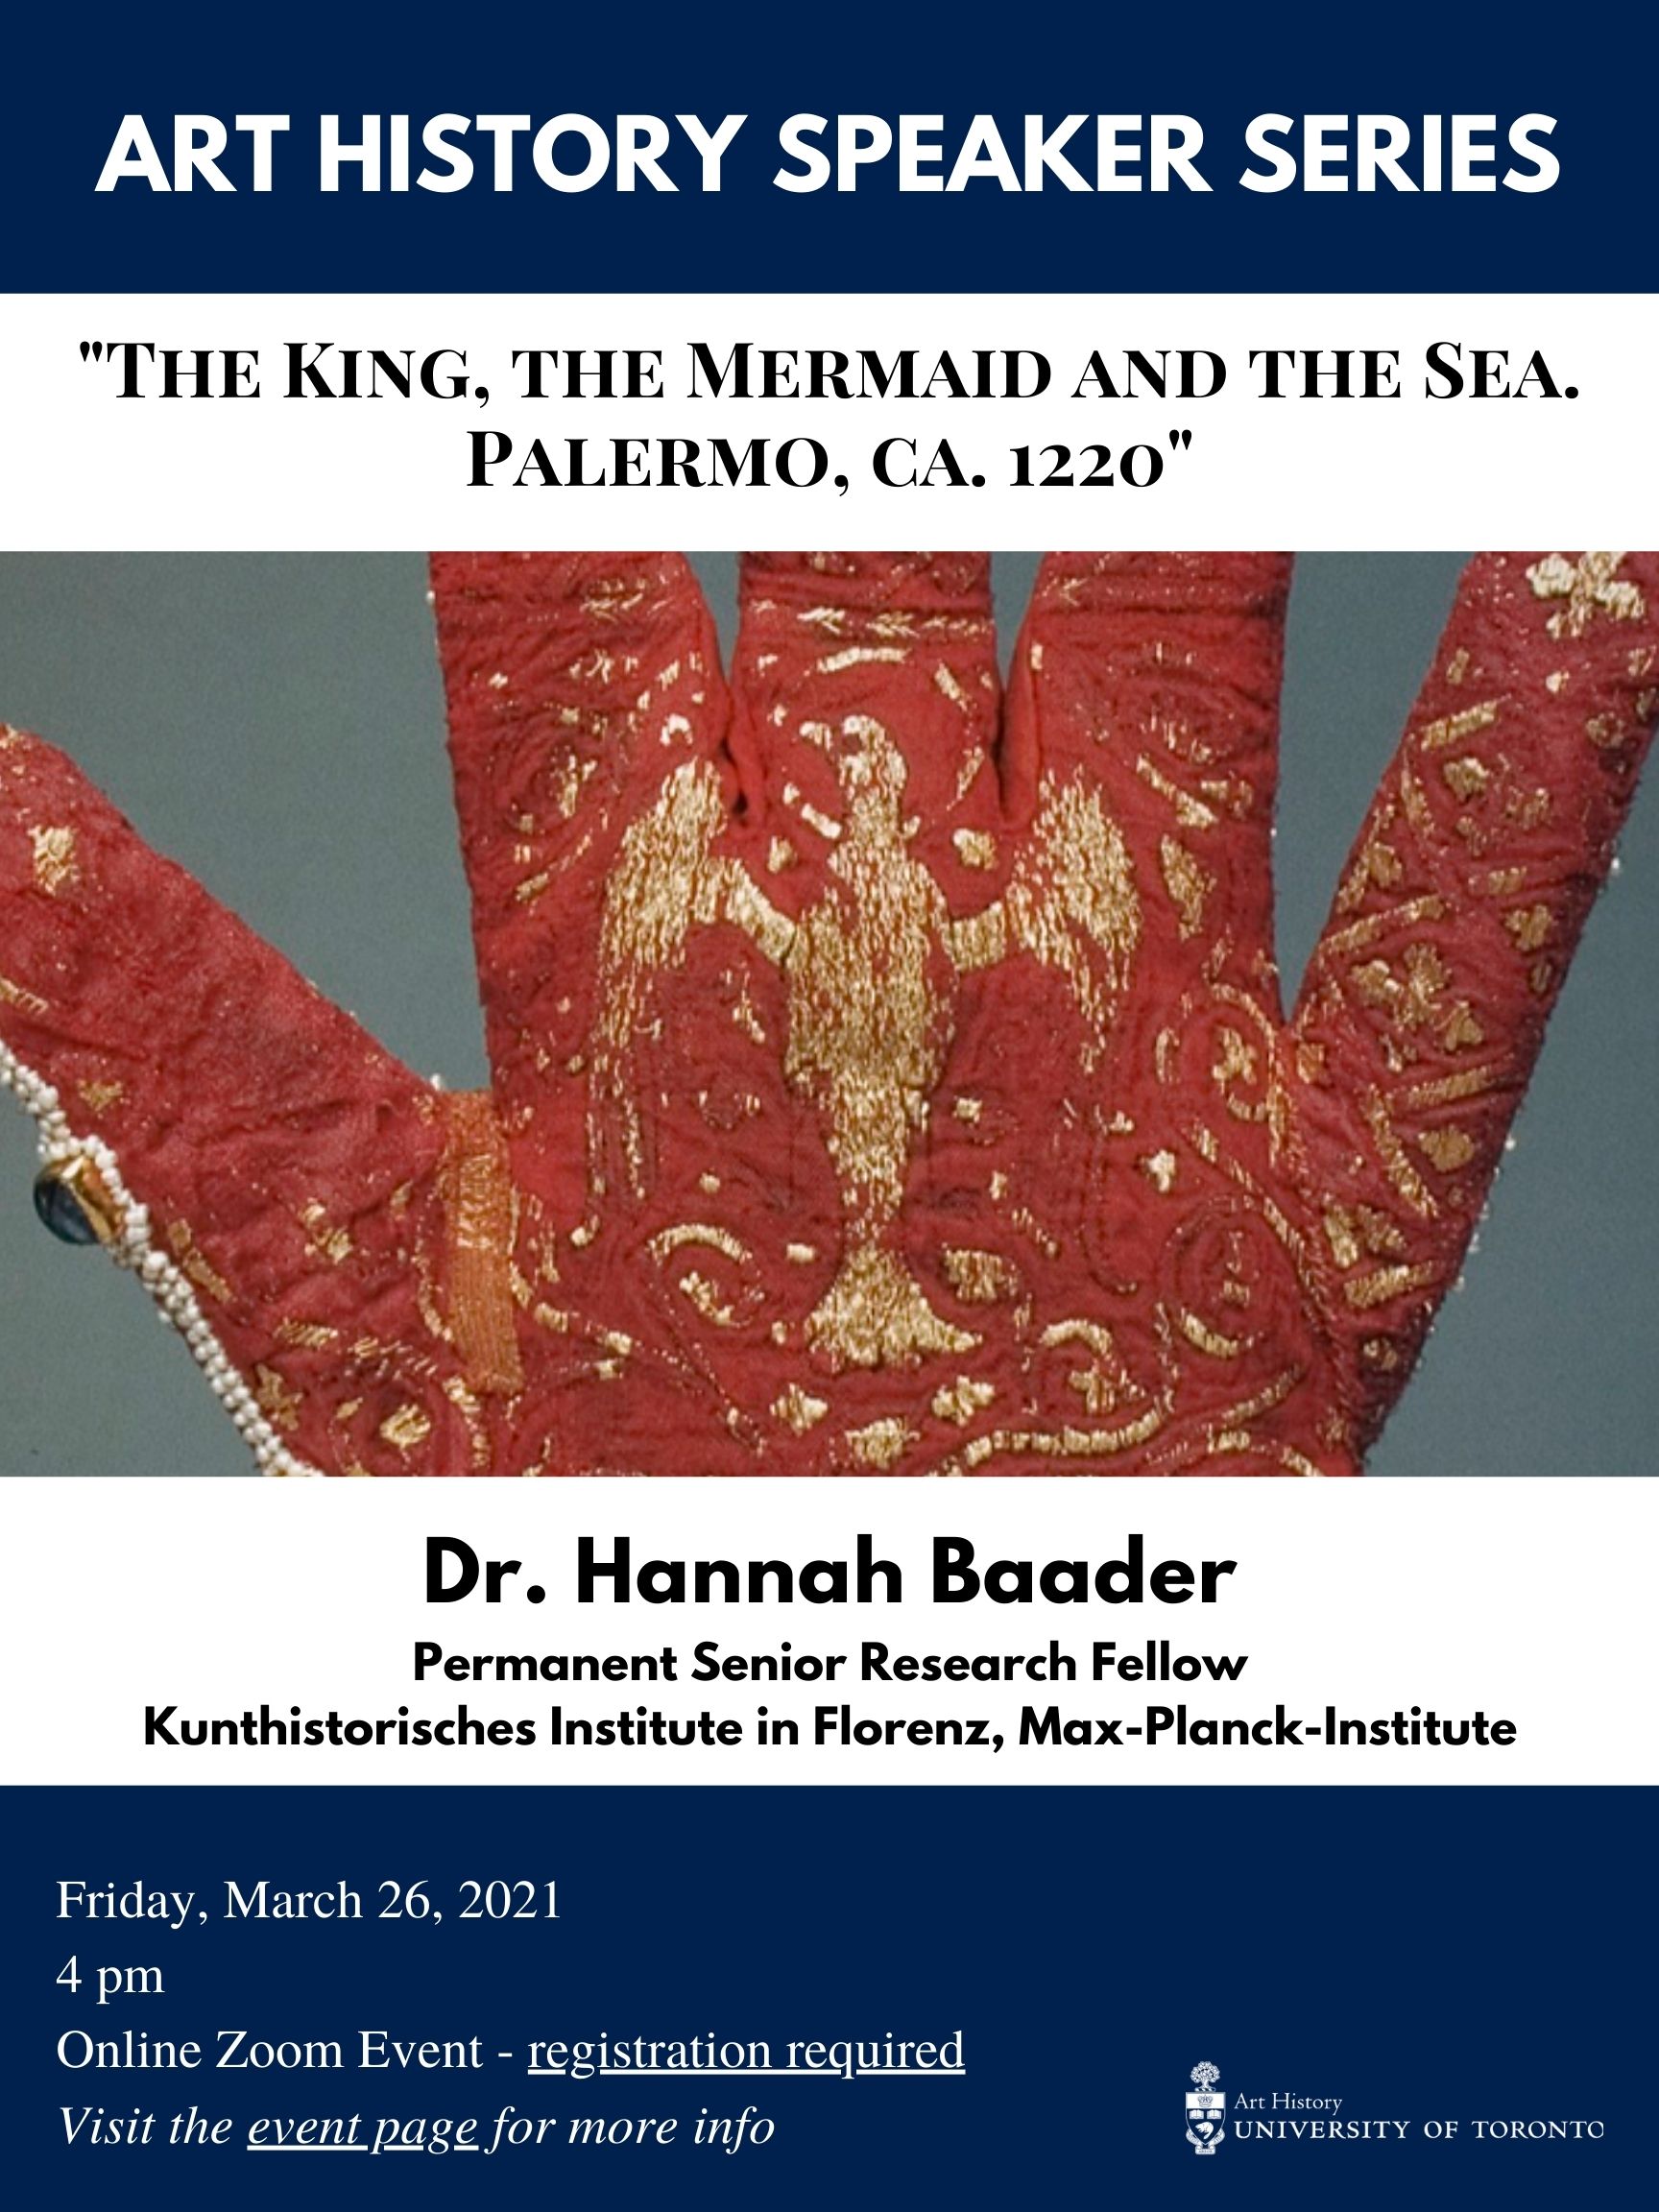 Art History Speaker Series Poster Dr. Hannah Baader March 26 2021 4pm